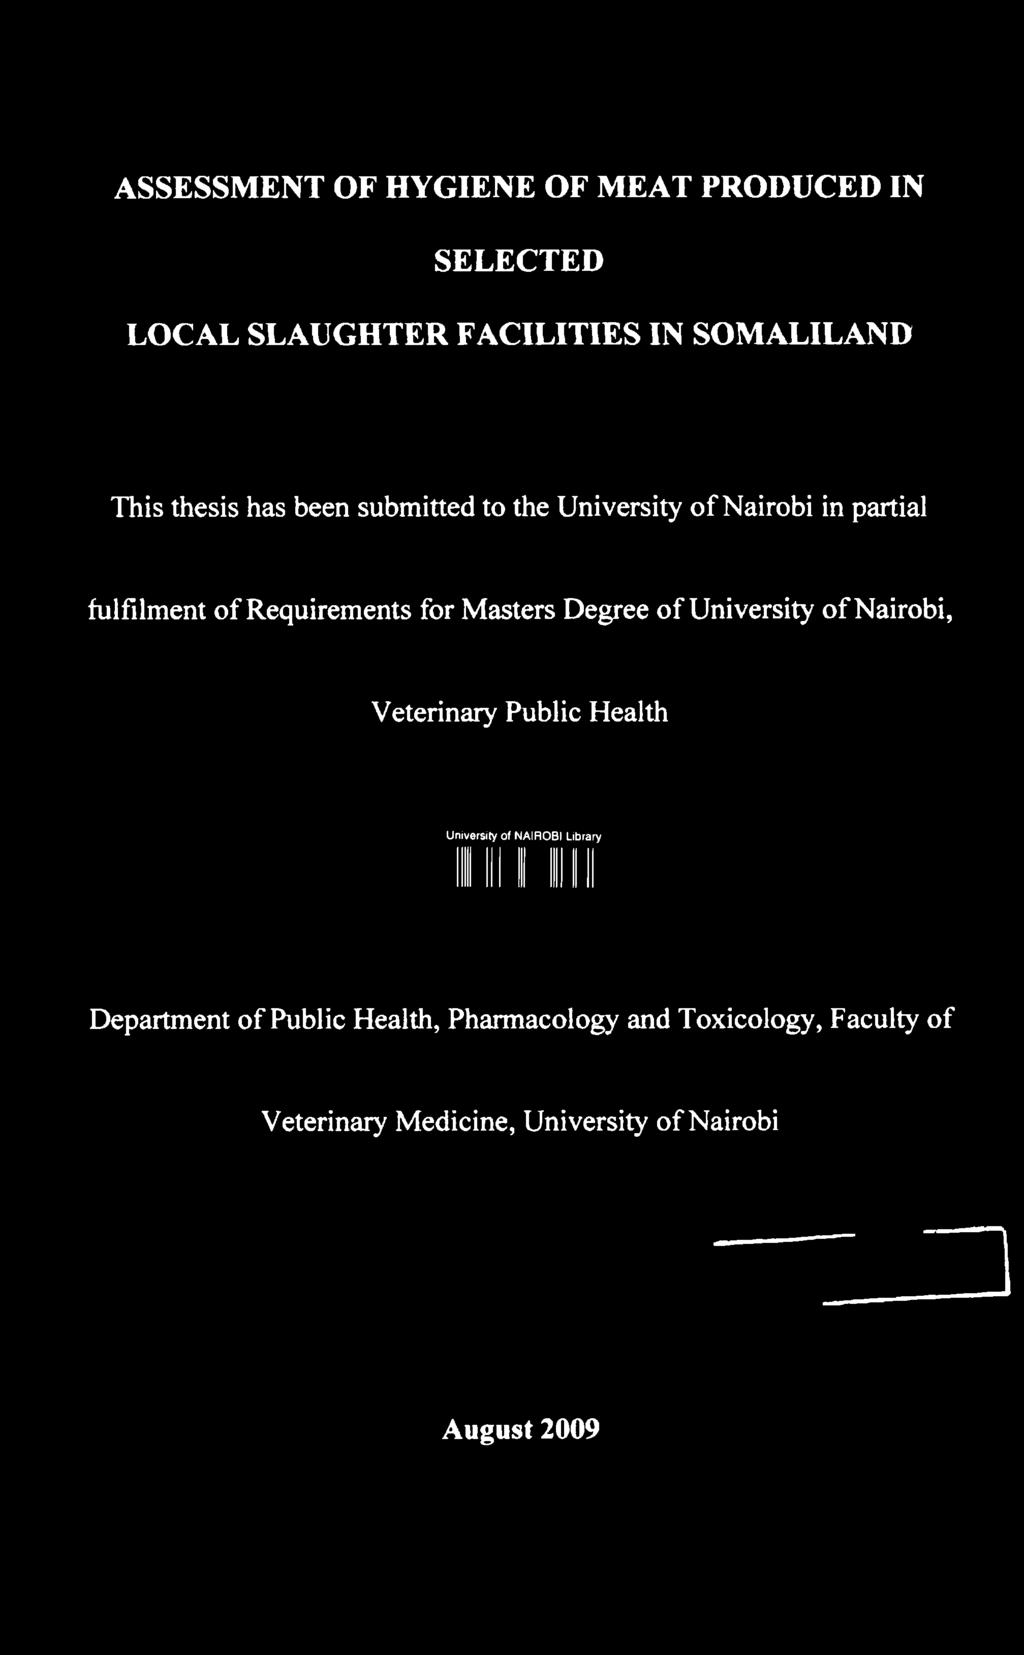 thesis has been submitted to the University of